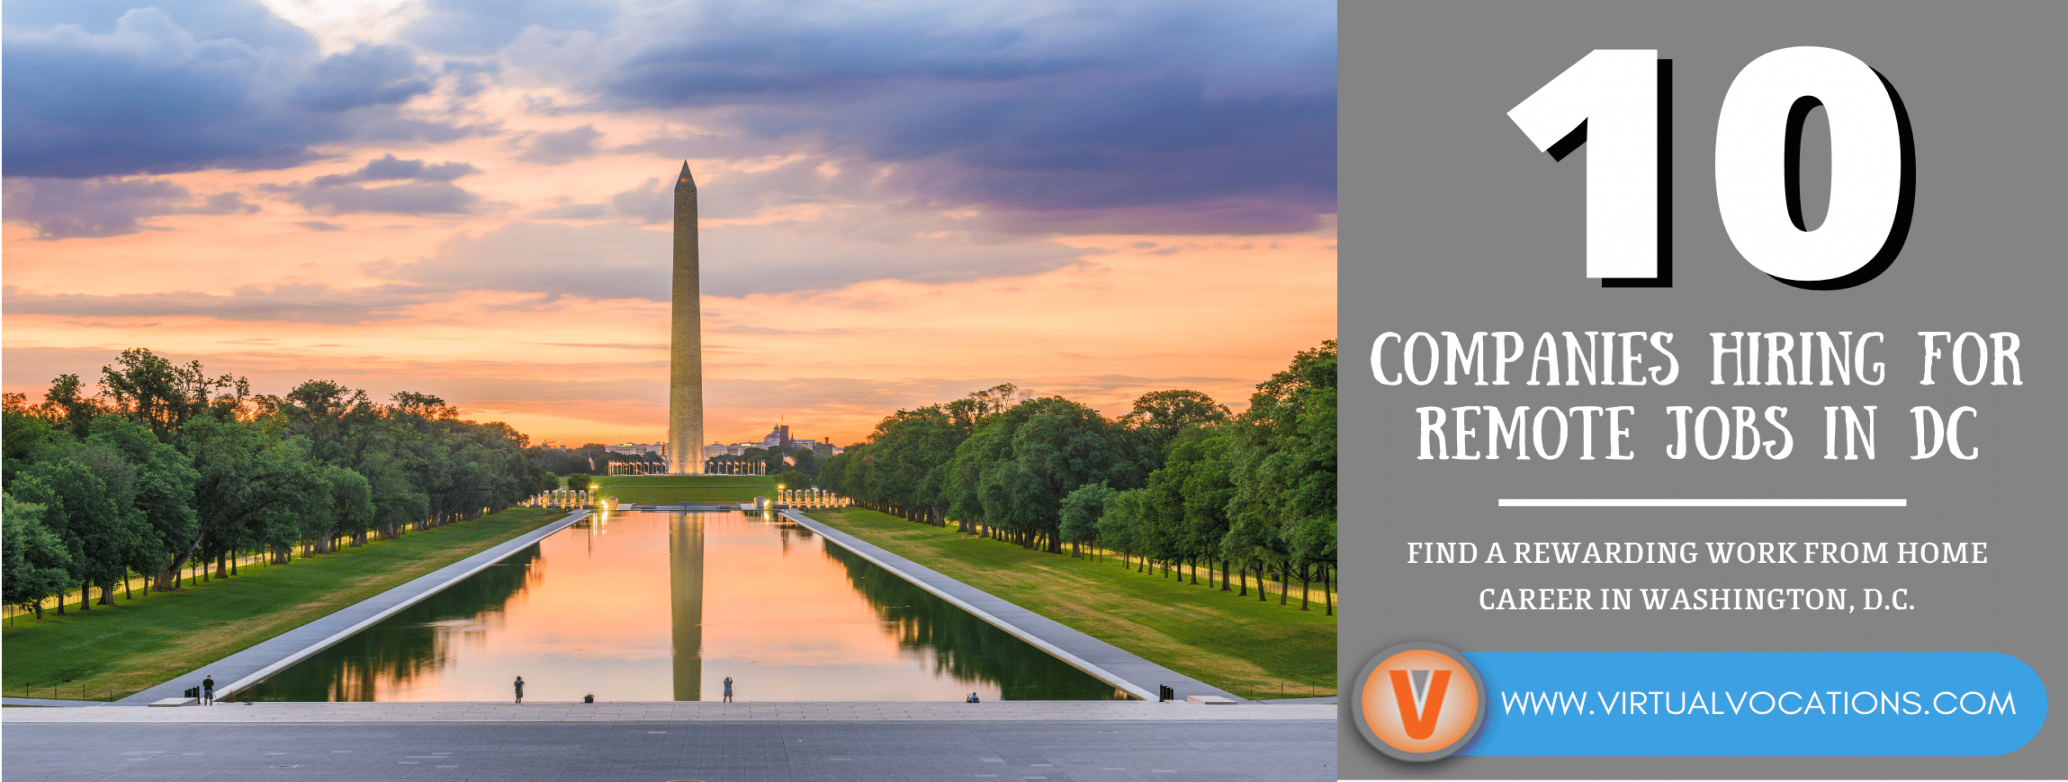 Companies Hiring for Remote Jobs in DC - Virtual Vocations